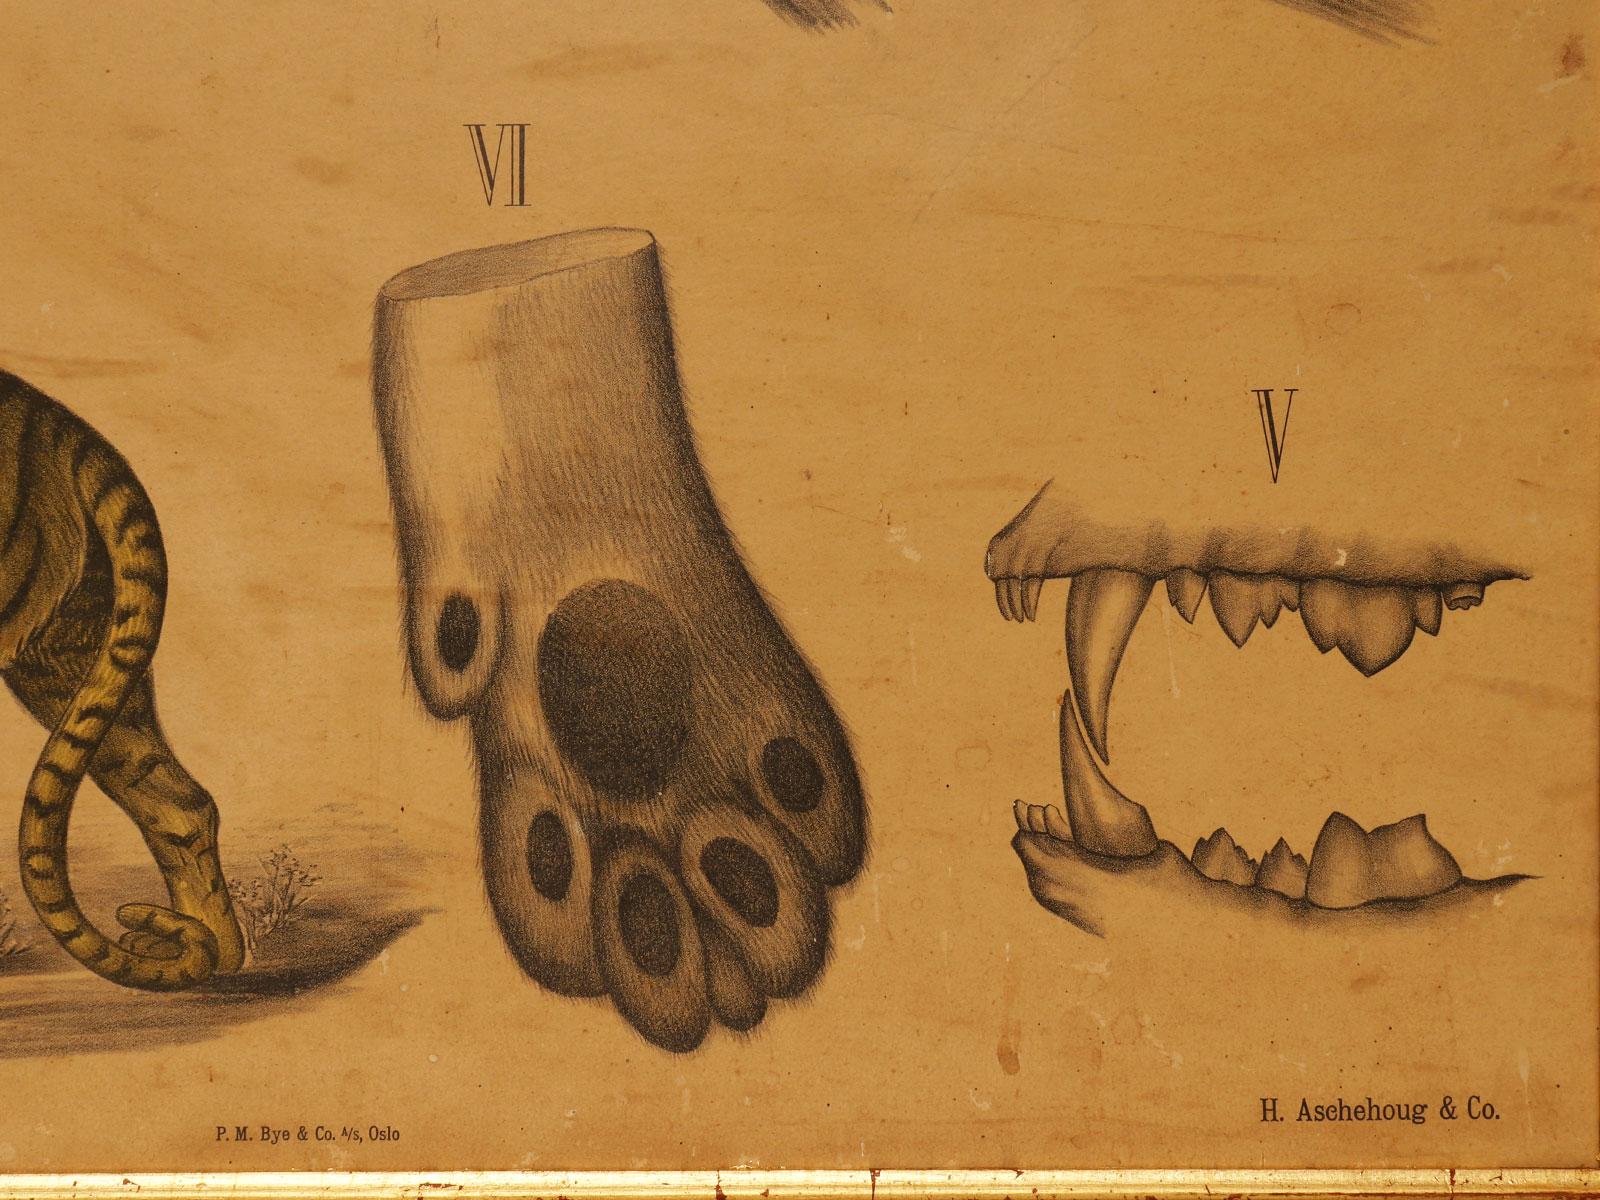 Walnut Anatomical Print on Paper, Depicting Felines, P. Dybdahls, Norway 1890 For Sale